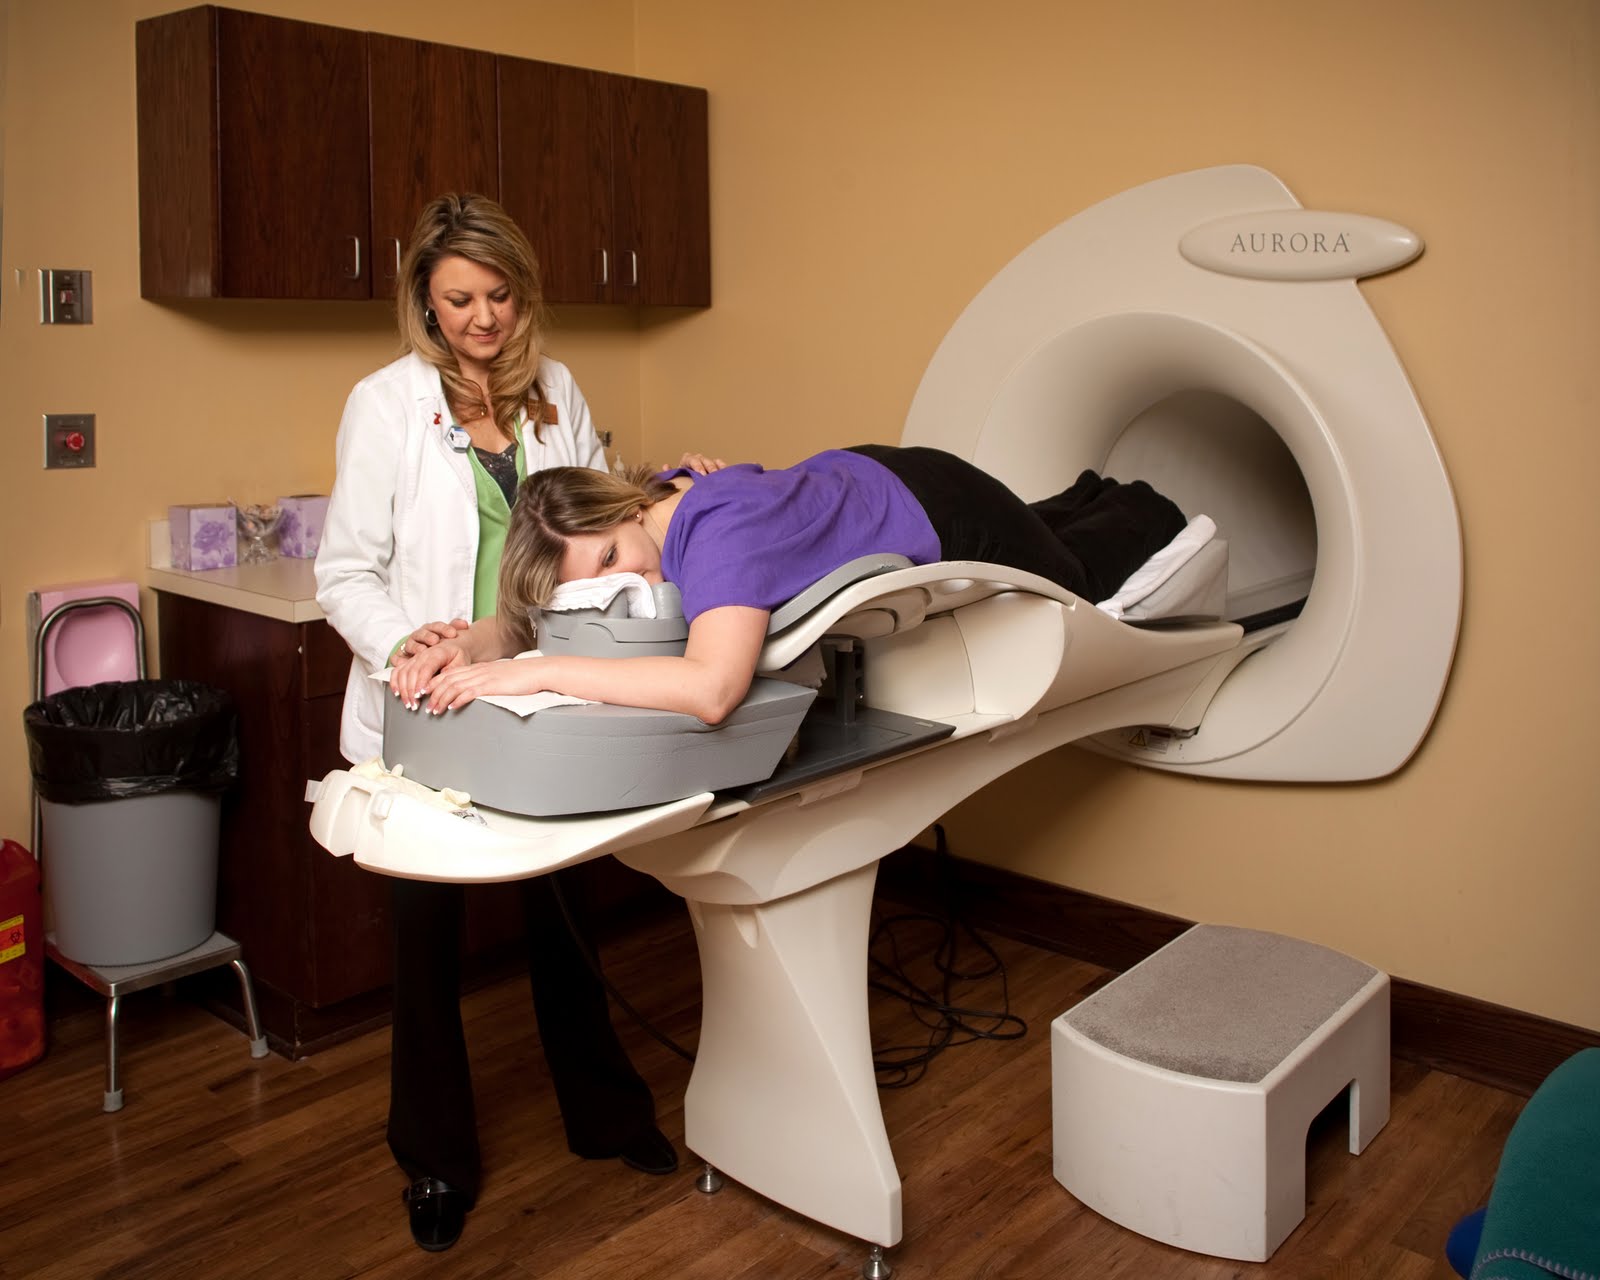 Here is what an MRI tube looks like for a breast scan: